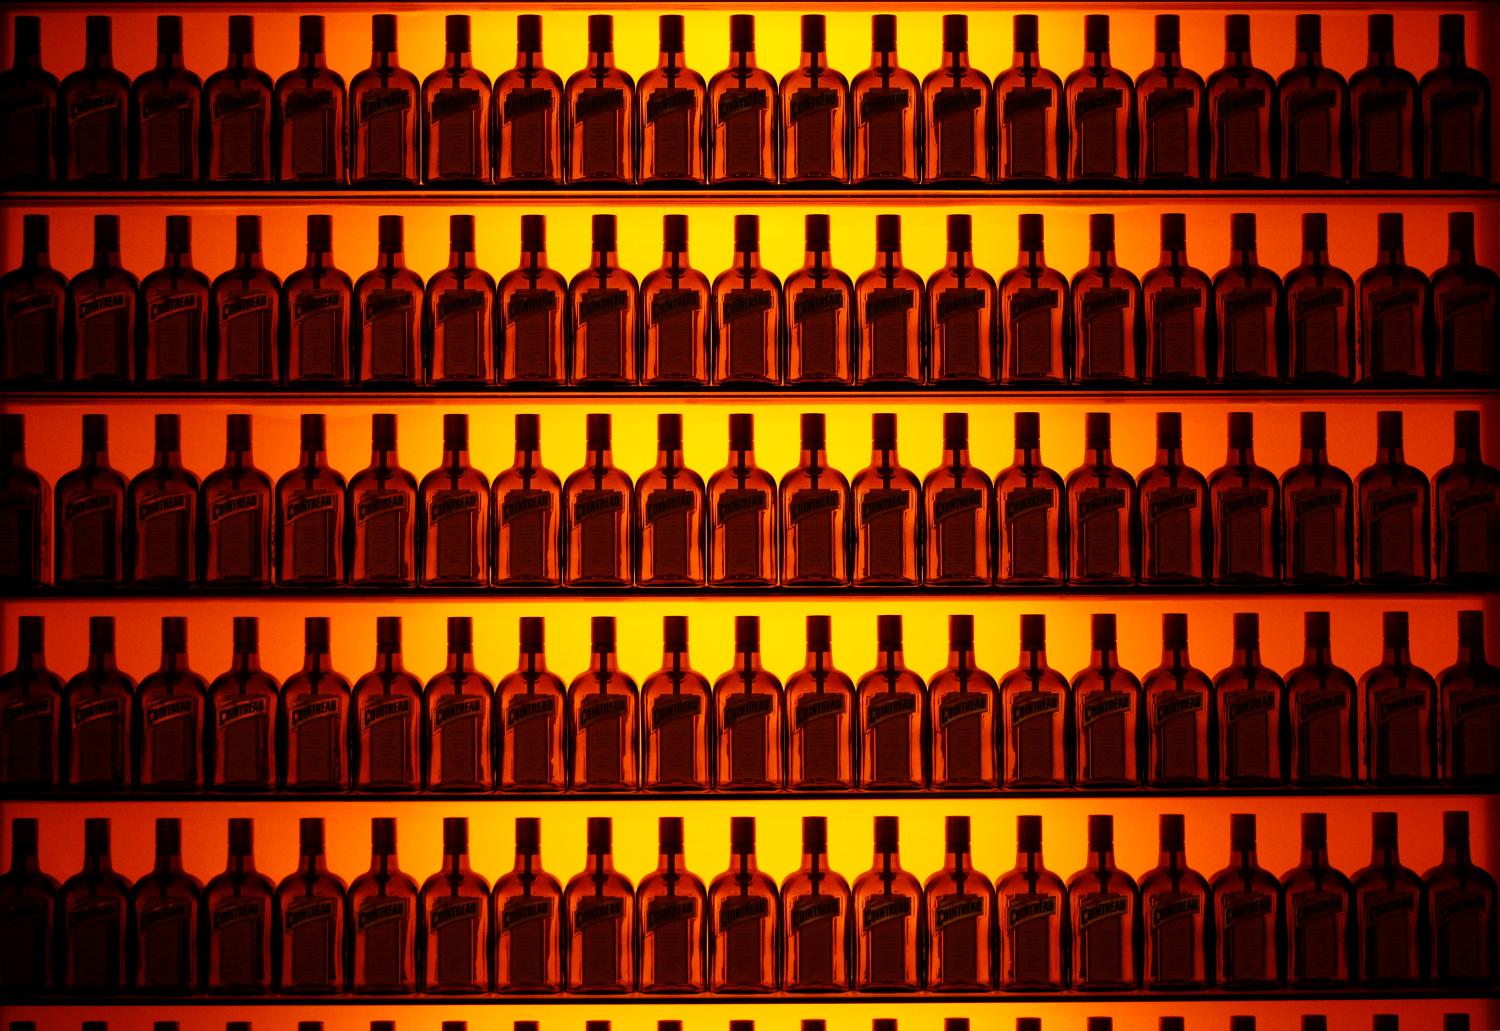 Bottles of Cointreau, the orange-flavoured triple sec liqueur, are displayed at the Carre Cointreau in the Cointreau distillery in Saint-Barthelemy-d'Anjou near Angers, France, February 8, 2019. REUTERS/Stephane Mahe - RC1EDD102B00